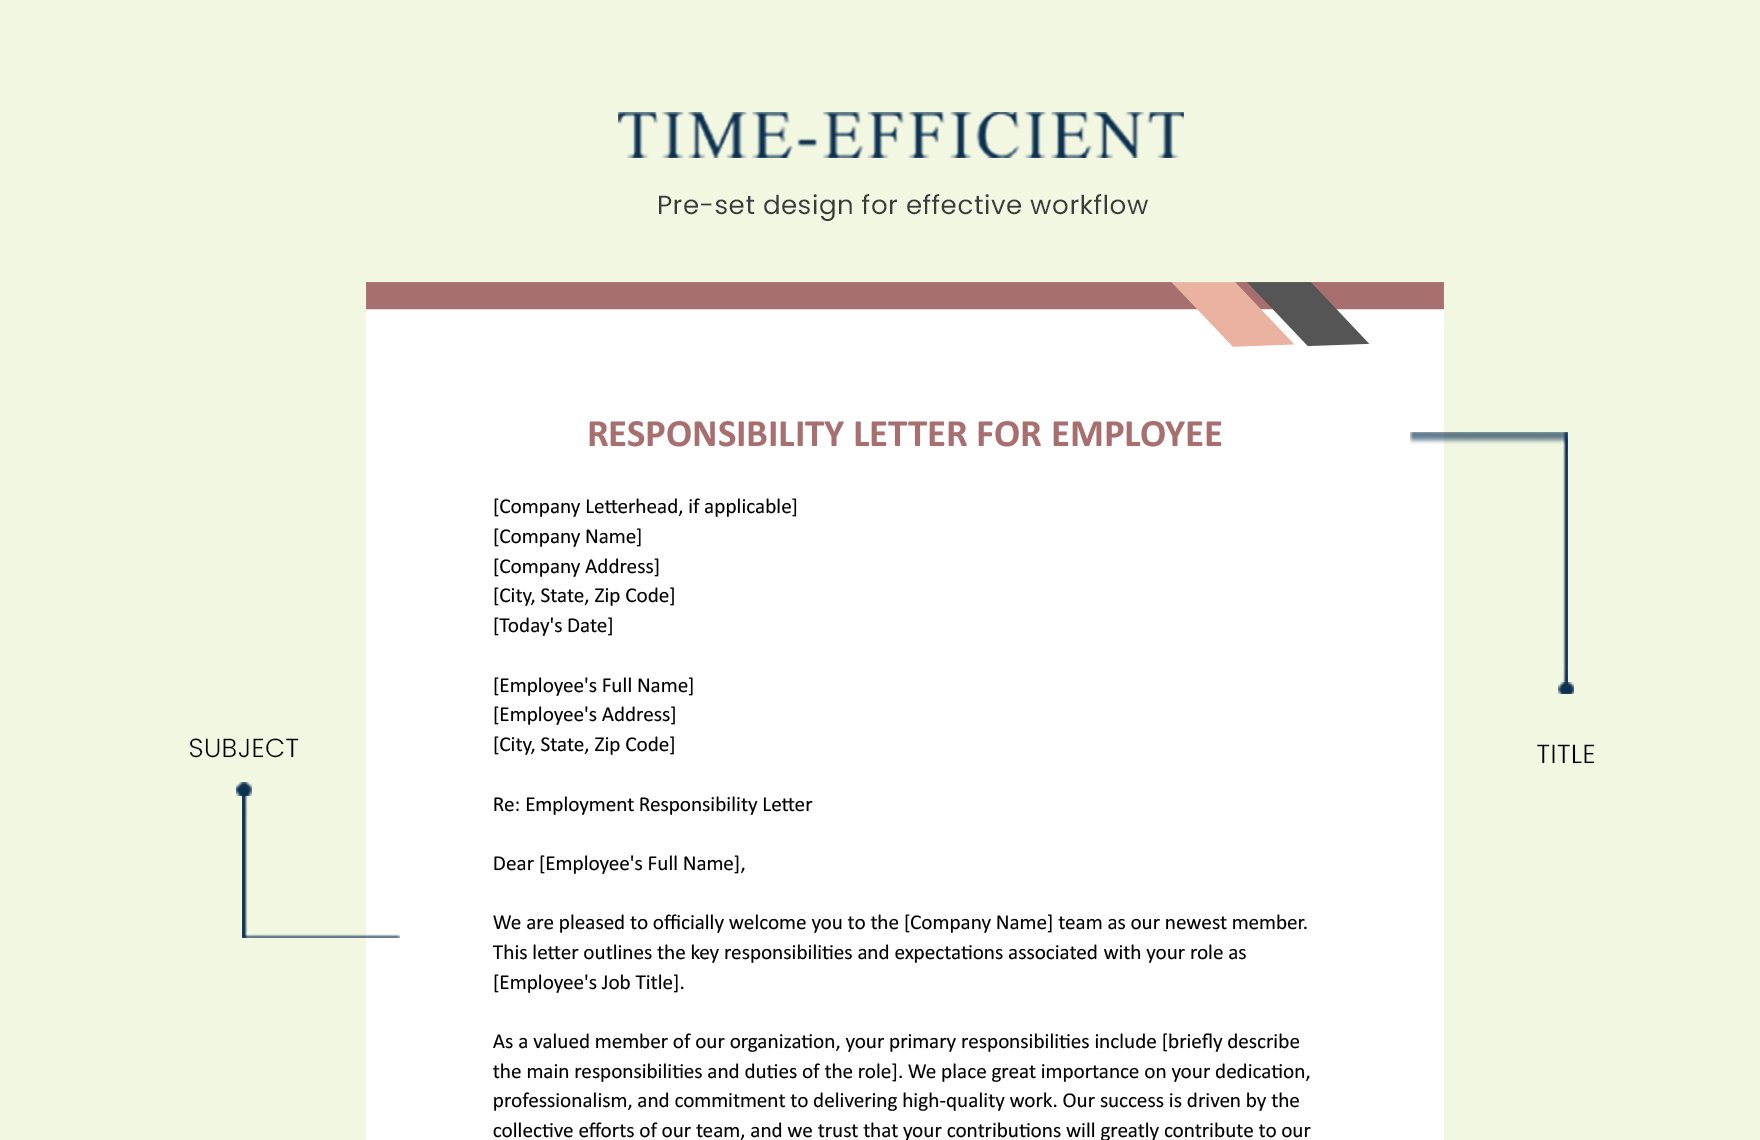 Responsibility Letter For Employee